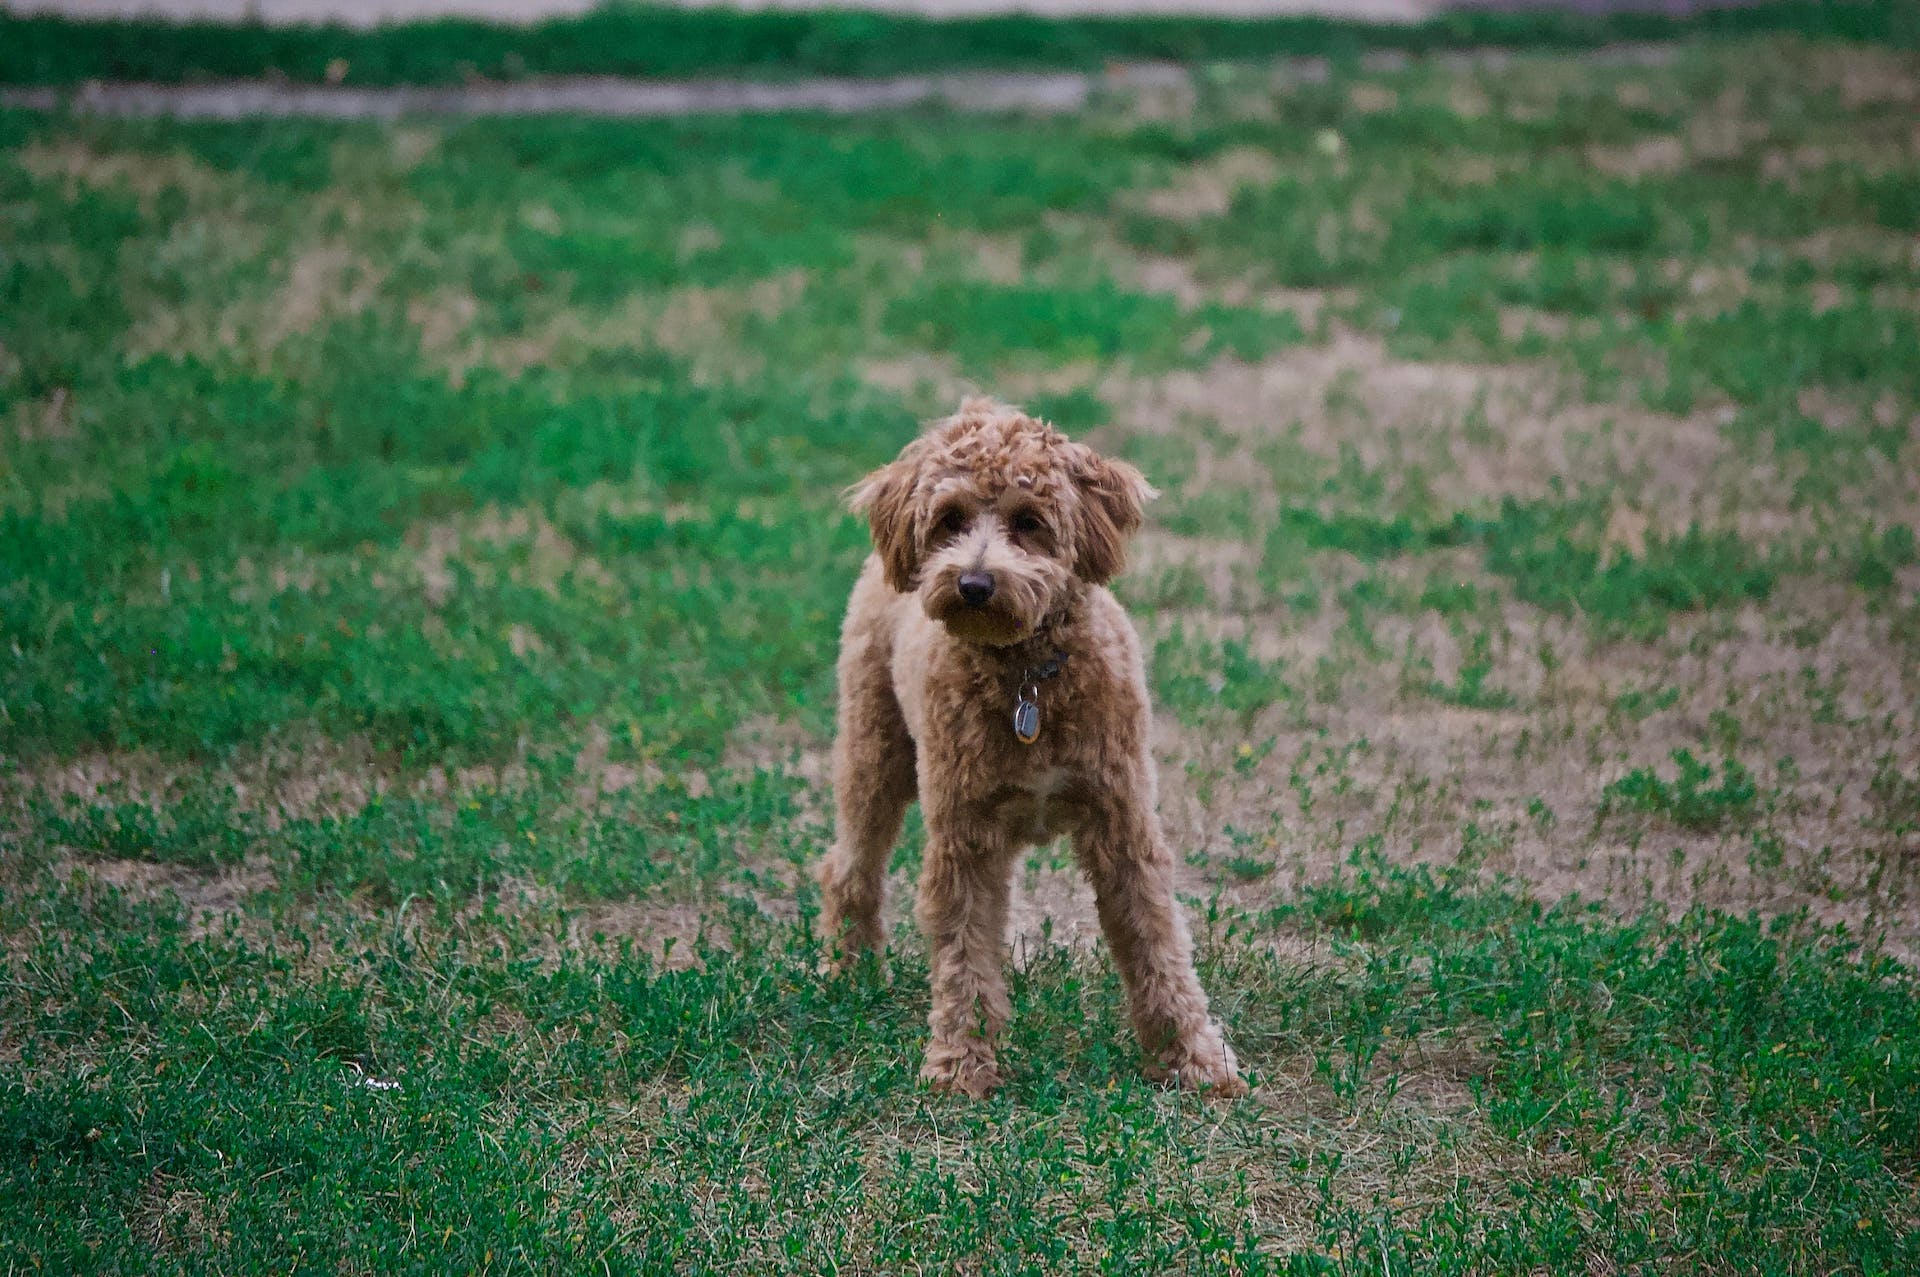 Brown poodle standing in a grass field | Source: Pexels